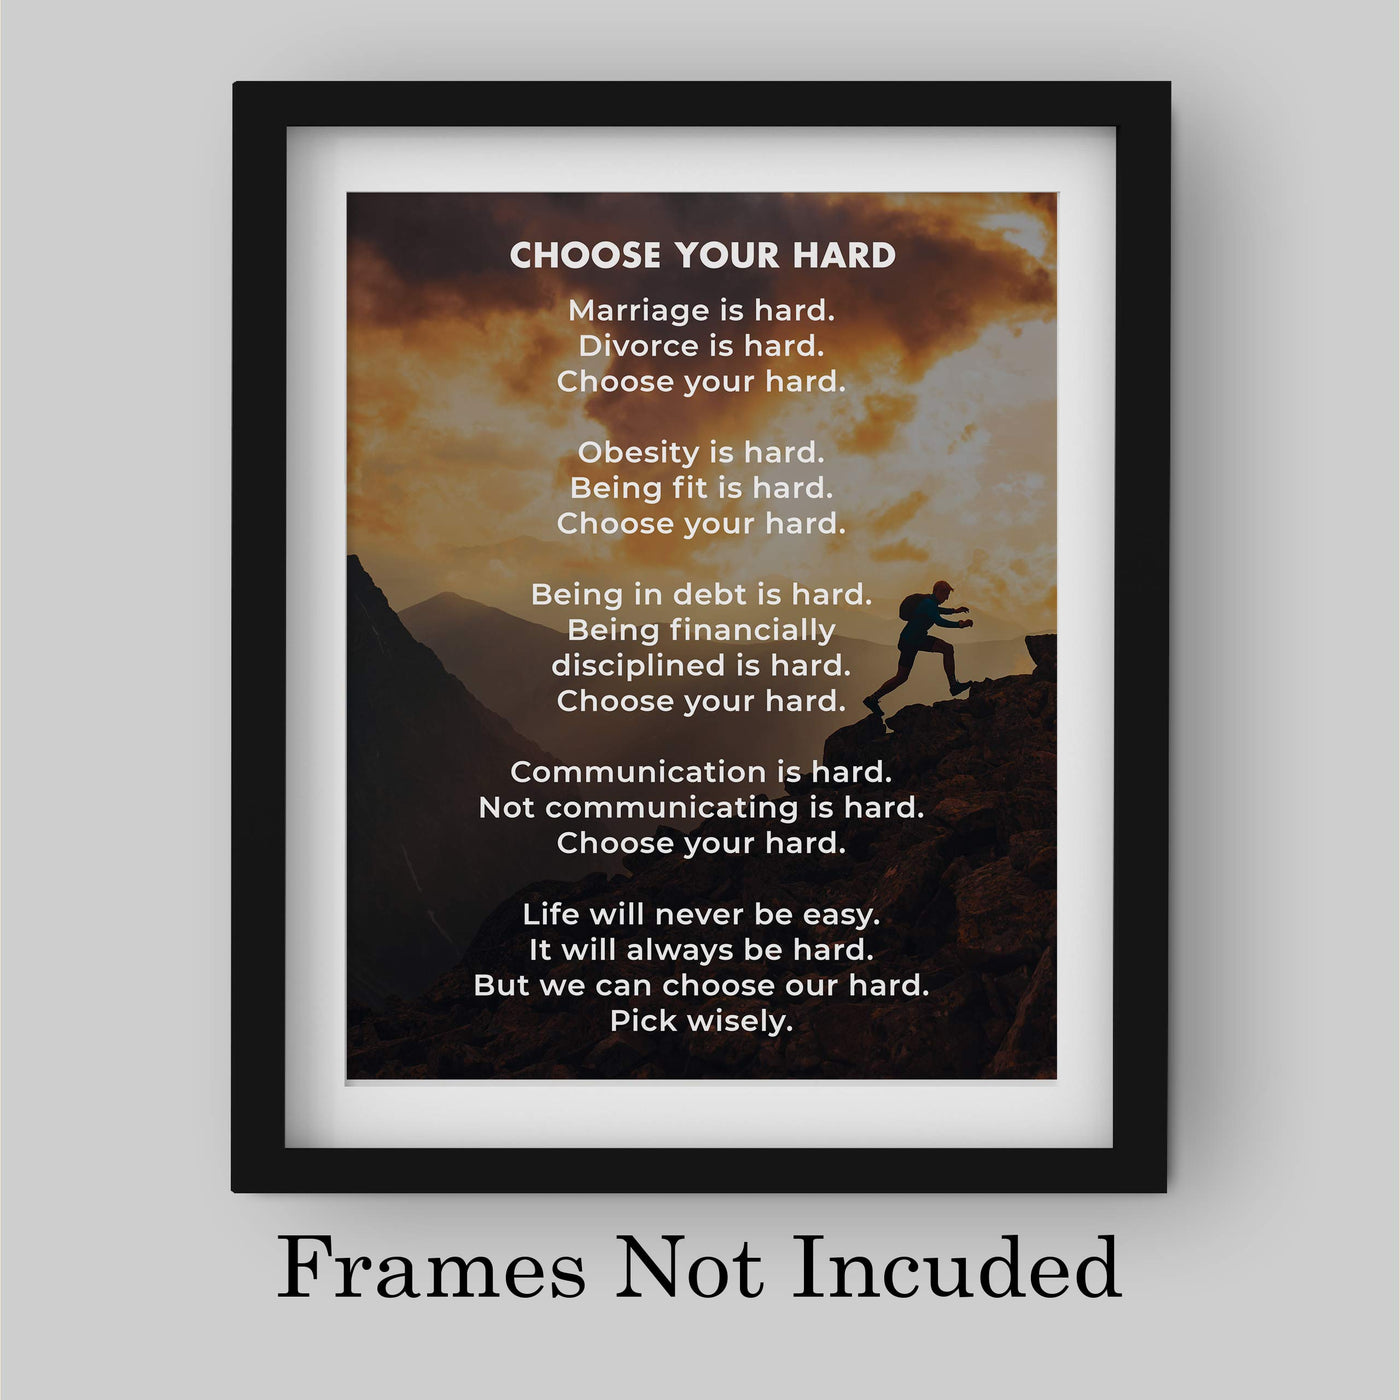 Choose Your Hard-Life Quotes Wall Art -8 x 10" Motivational Poster Print-Ready to Frame. Modern Typographic Design. Inspirational Decoration for Home-Office-Studio-Dorm Decor! Great Advice for All!